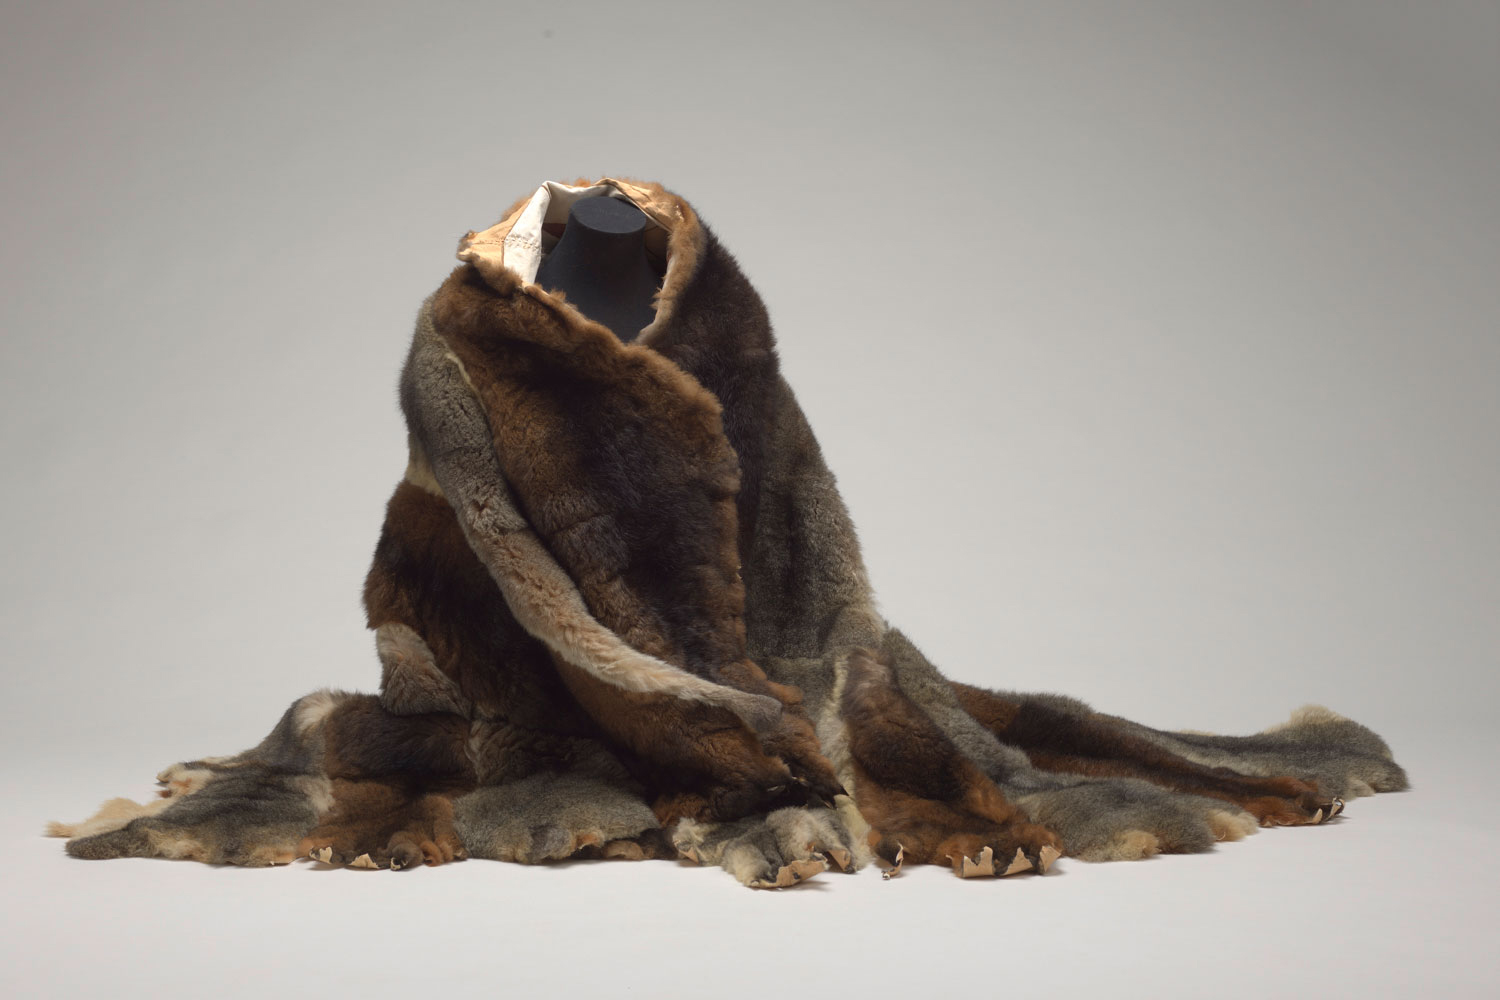 Wrapped in love: The layers of meaning in Canberra's possum skin cloaks